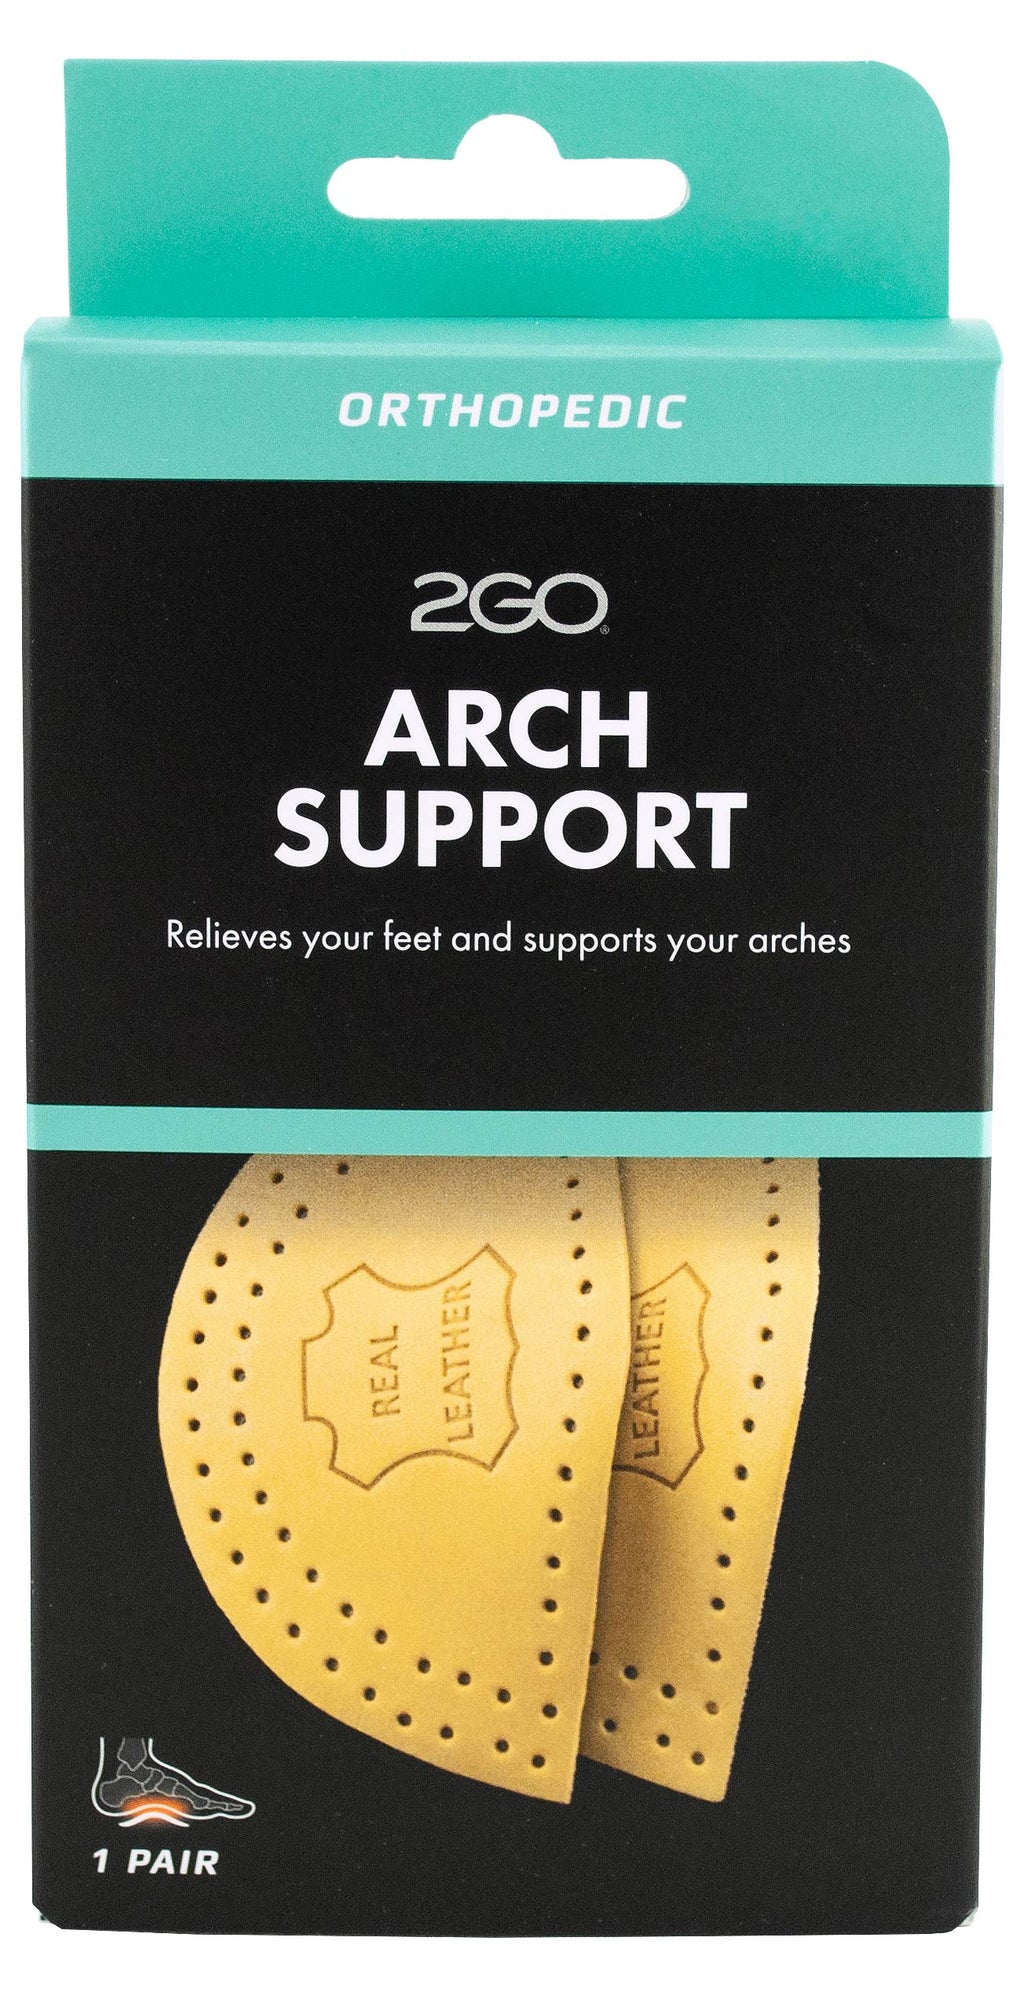 2GO - Orthopedic Arch Support